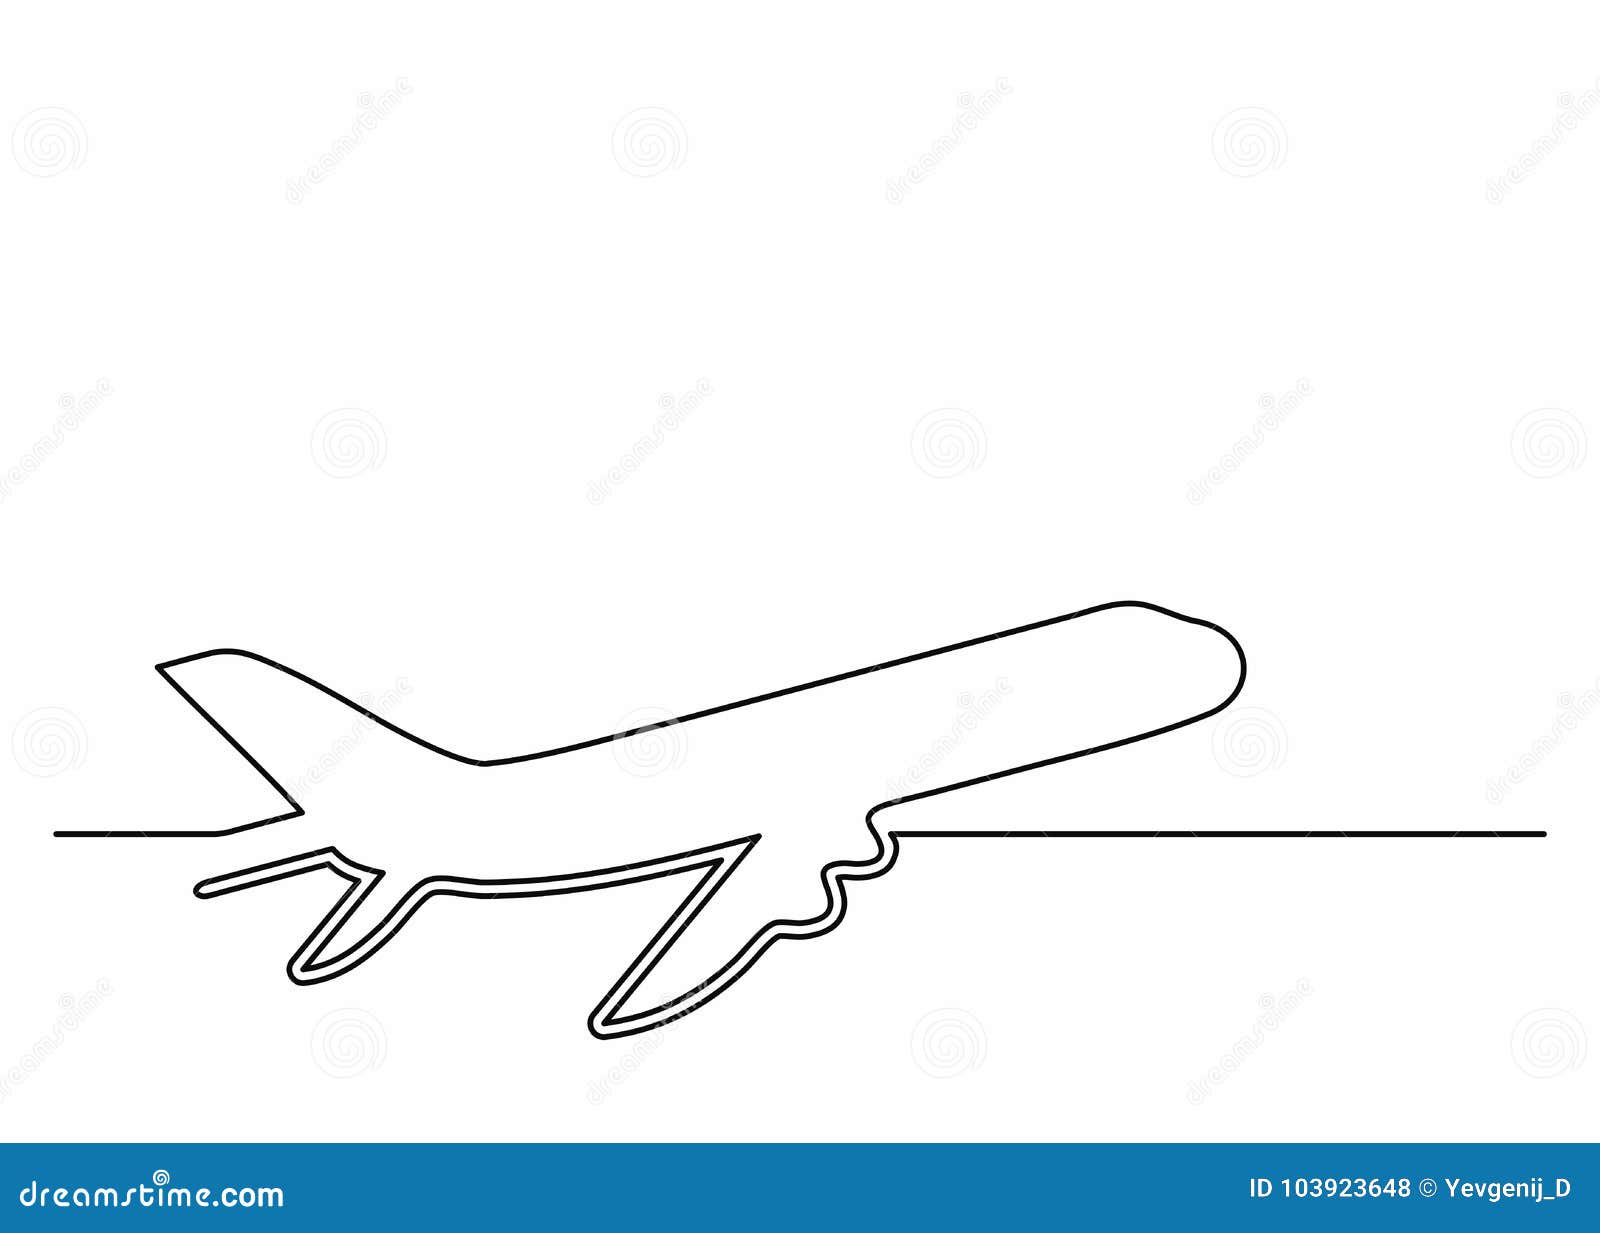 plane icon in line art style. airliner icon. continuous line drawing. single, unbroken line drawing style